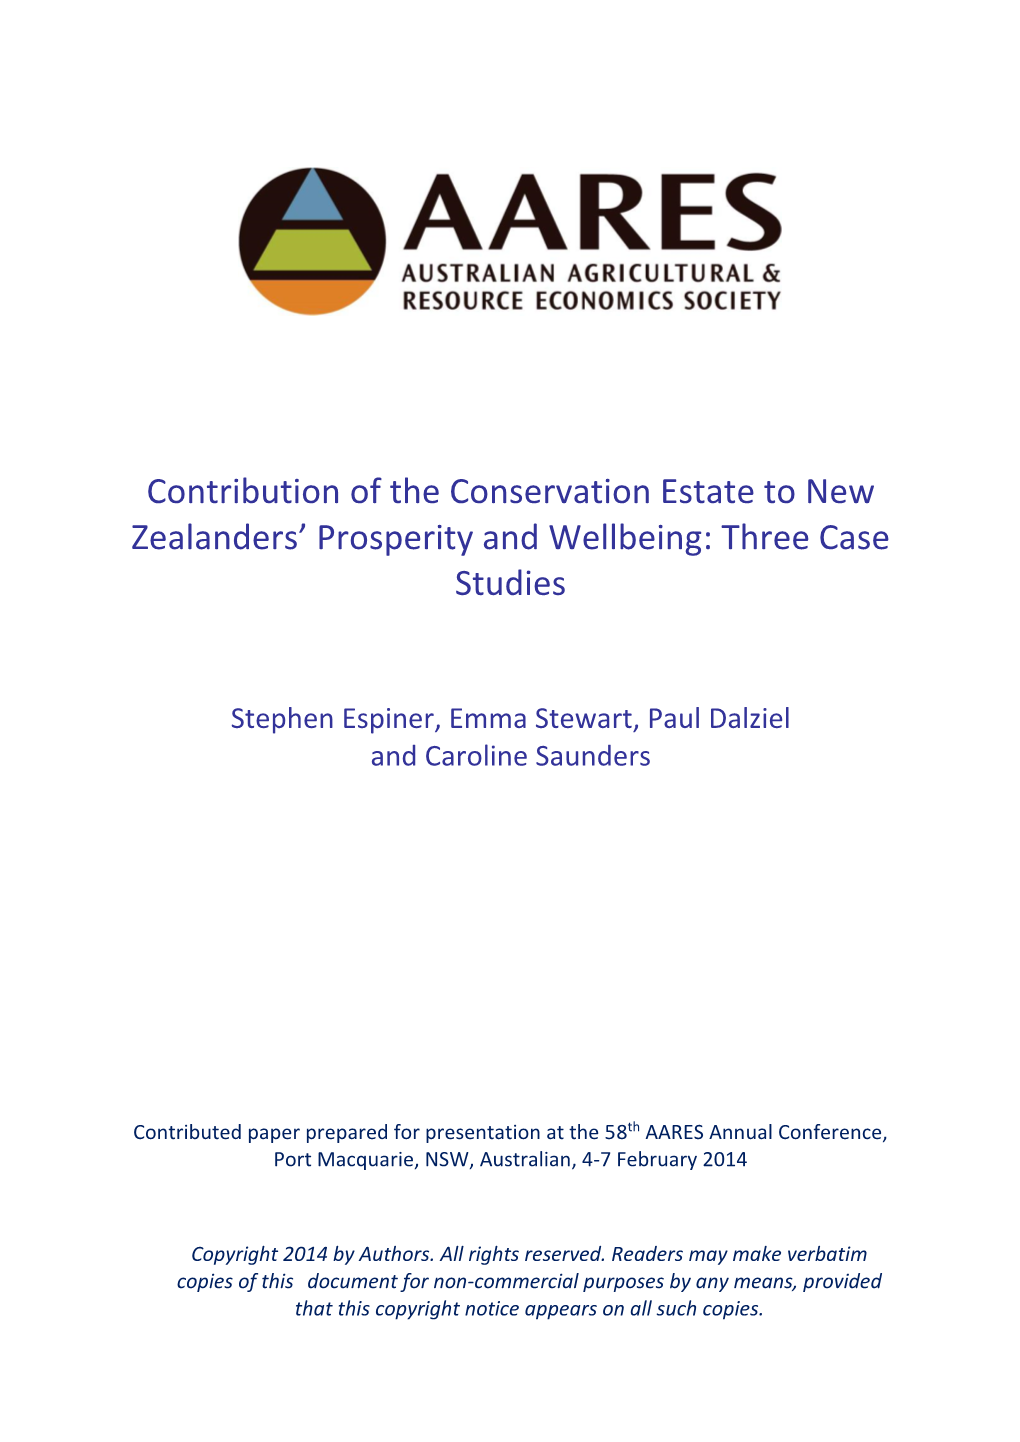 Contribution of the Conservation Estate to New Zealanders’ Prosperity and Wellbeing: Three Case Studies